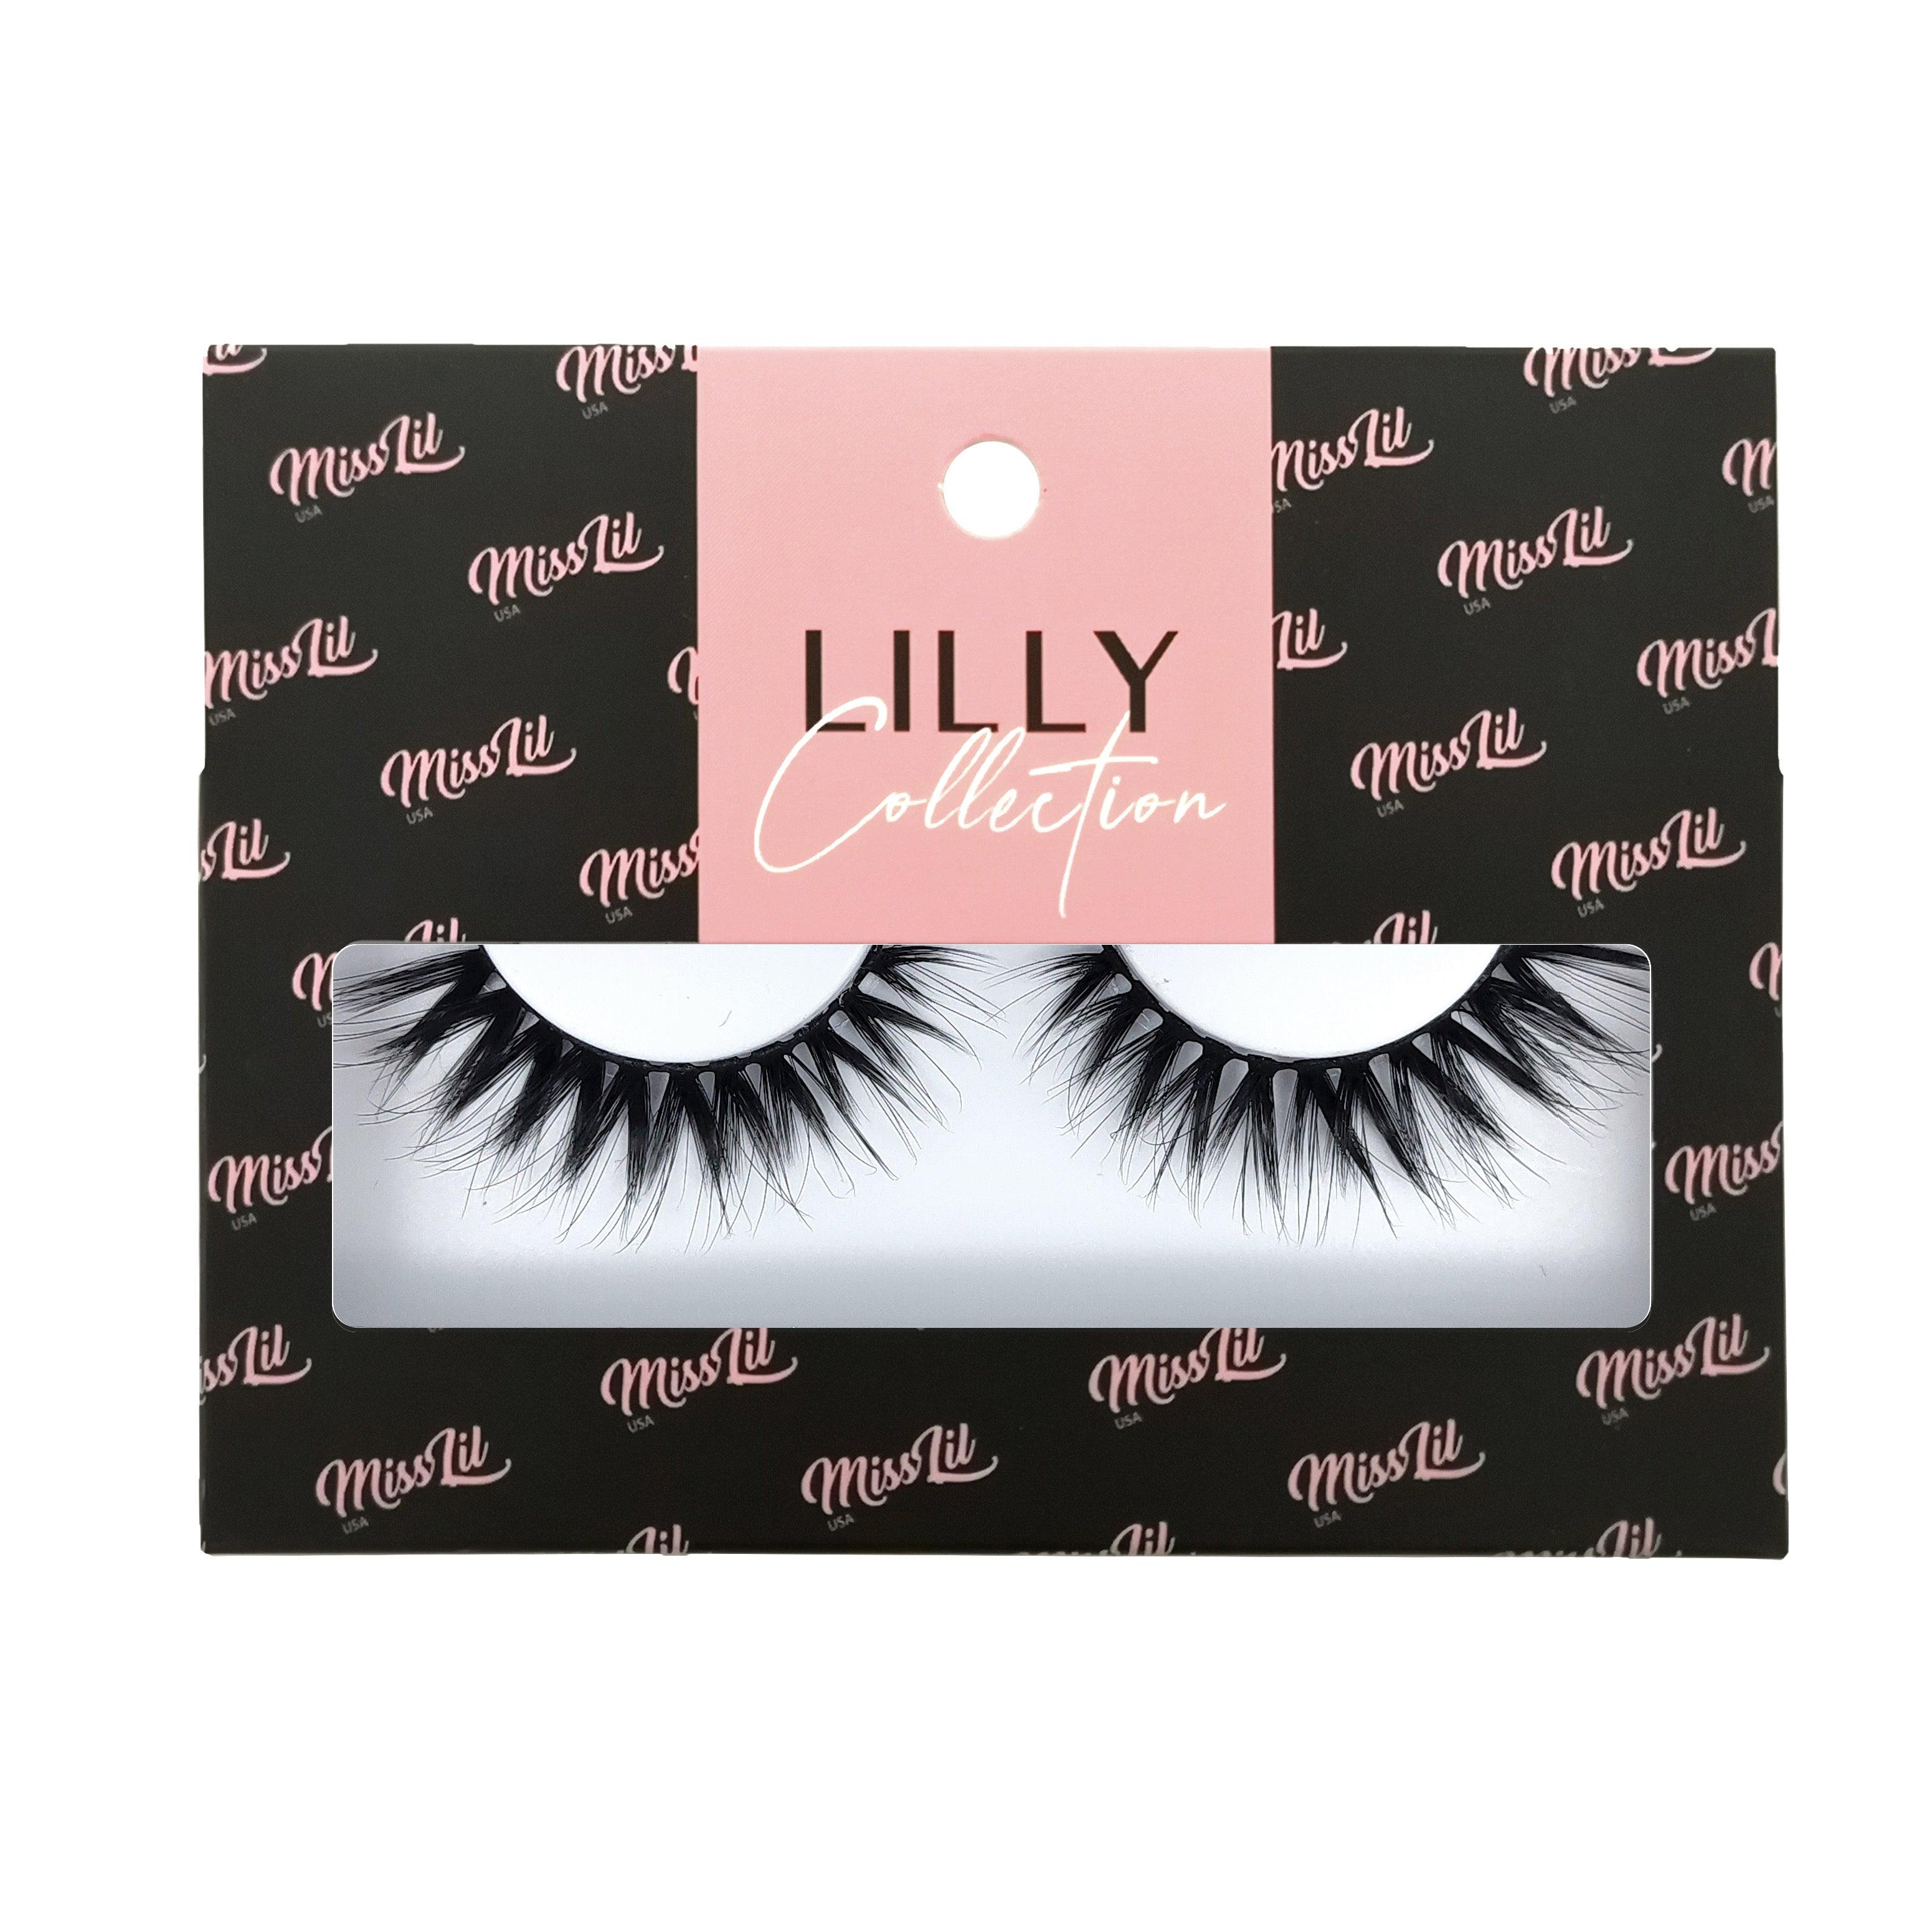 1-Pair Lashes-Lilly Collection #5 (Pack of 12) - Miss Lil USA Wholesale